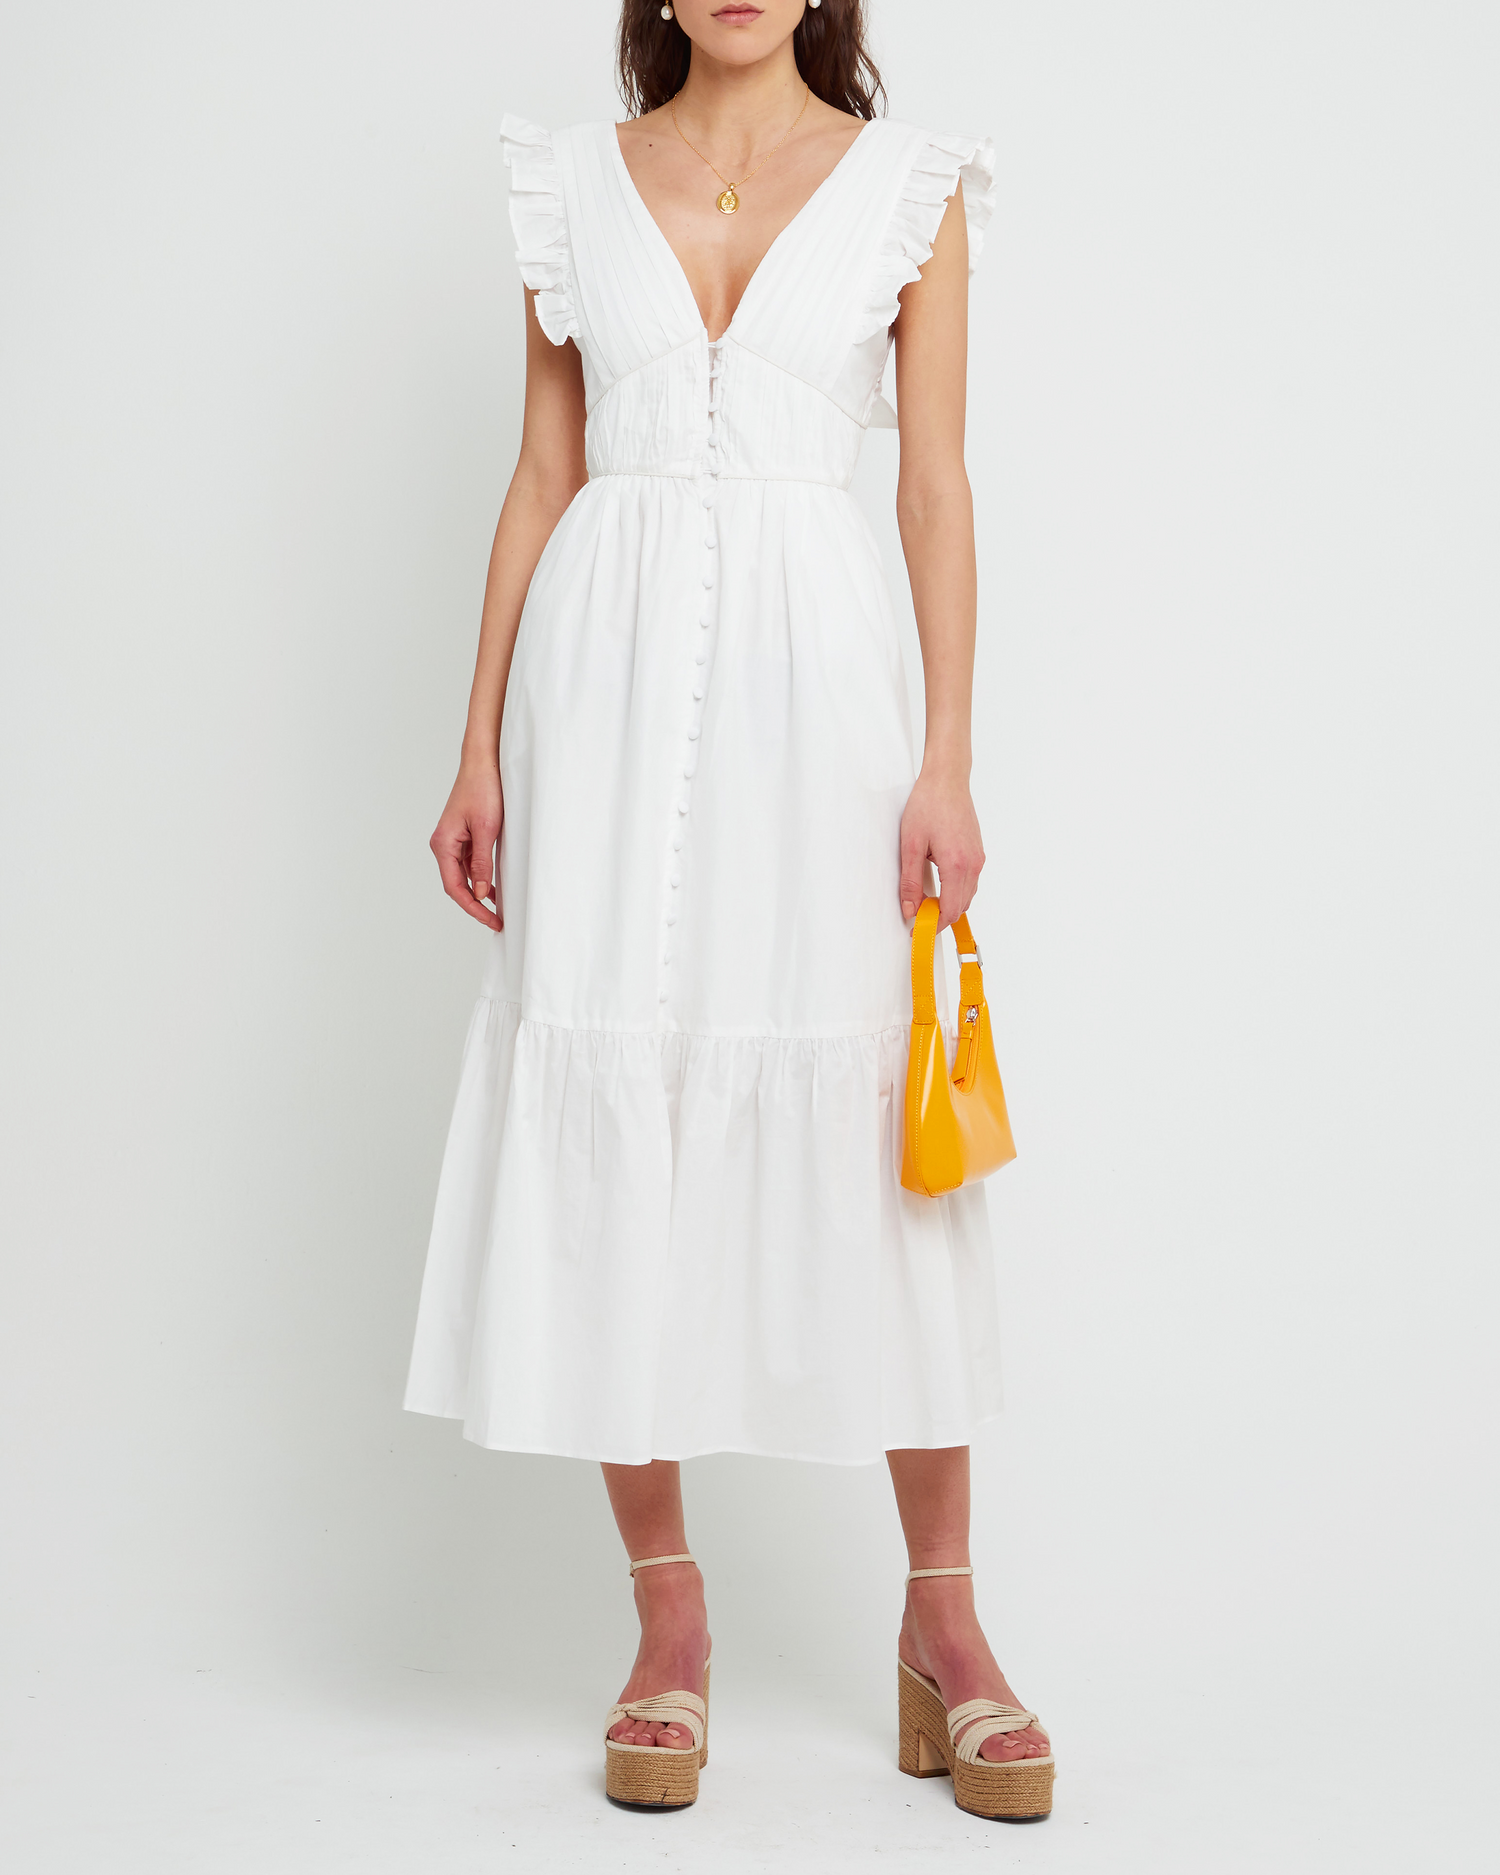 First image of Stella Dress, a white midi dress, front buttons, ruffle sleeve, open back, tiered, tie, ribbon, bow